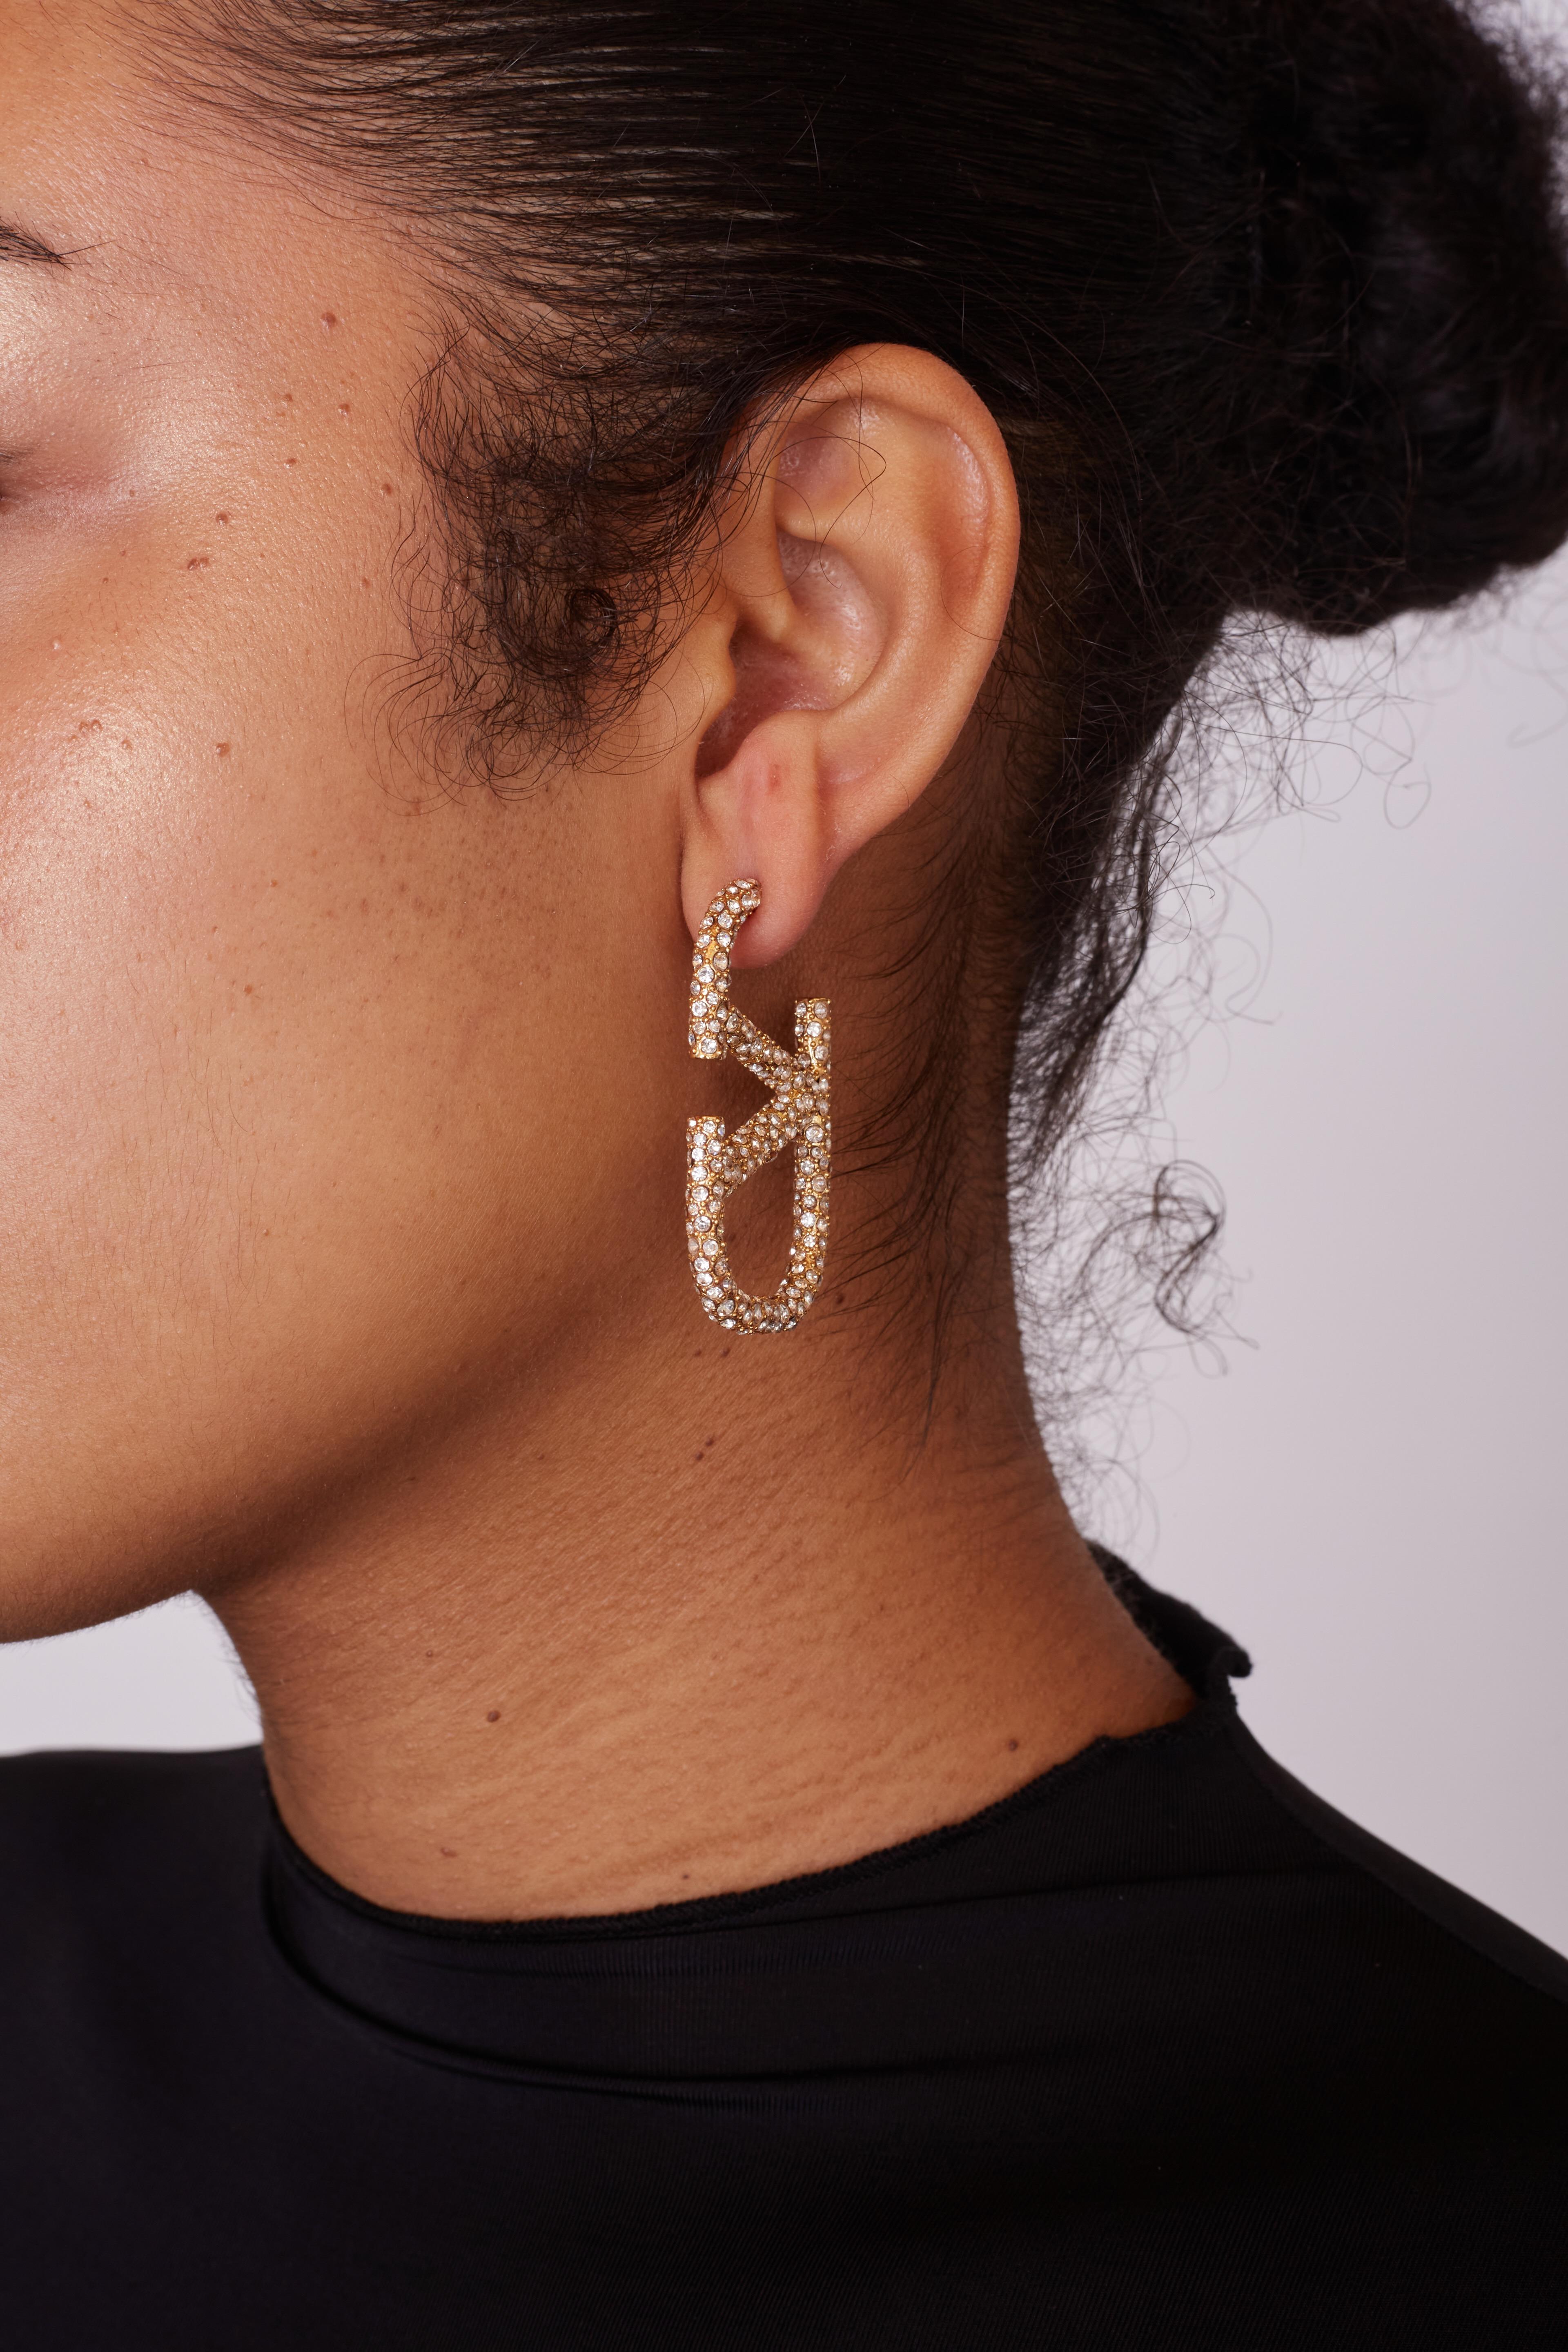 VALENTINO GARAVANI VLOGO SIGNATURE GOLD-TONE METAL CRYSTAL EARRINGS

The VLogo Signature earrings feature metal construction with strass and a gold-tone finish. Code, 2W2J0G04YCW_MH5.

Color: Gold tone
Material: metal with stress
Marks: brand